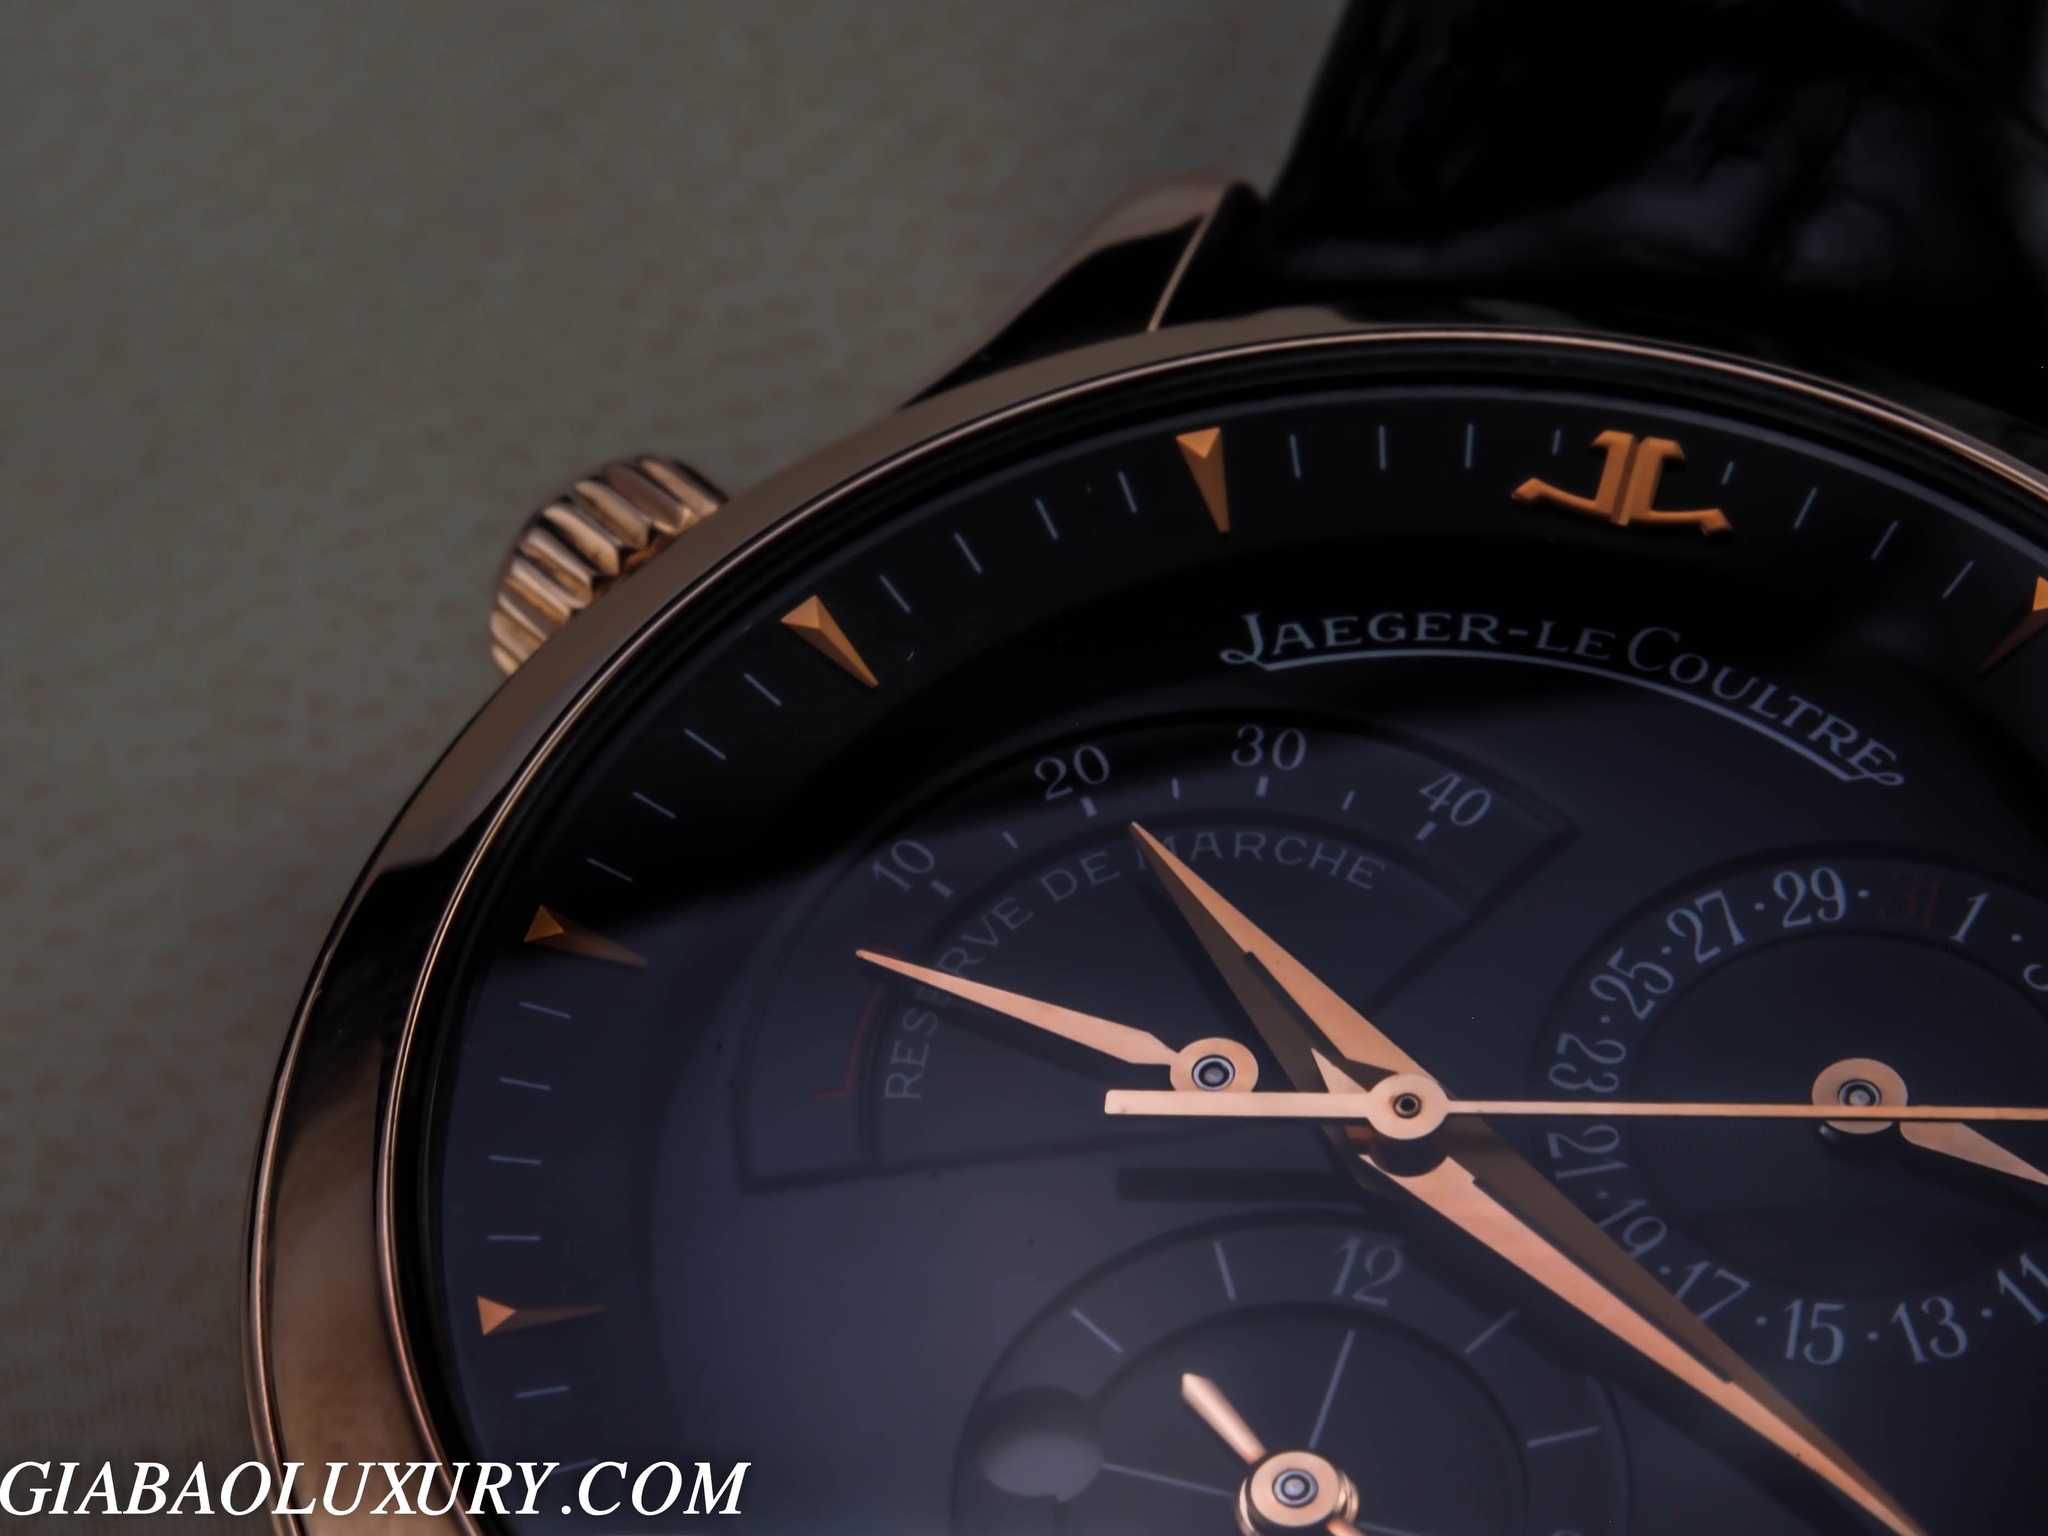 REVIEW ĐỒNG HỒ JAEGER - LECOULTRE MASTER CONTROL 1000 HOUR GEOGRAPHIC  18K  ROSE GOLD BỞI GIA BẢO LUXURY WATCH